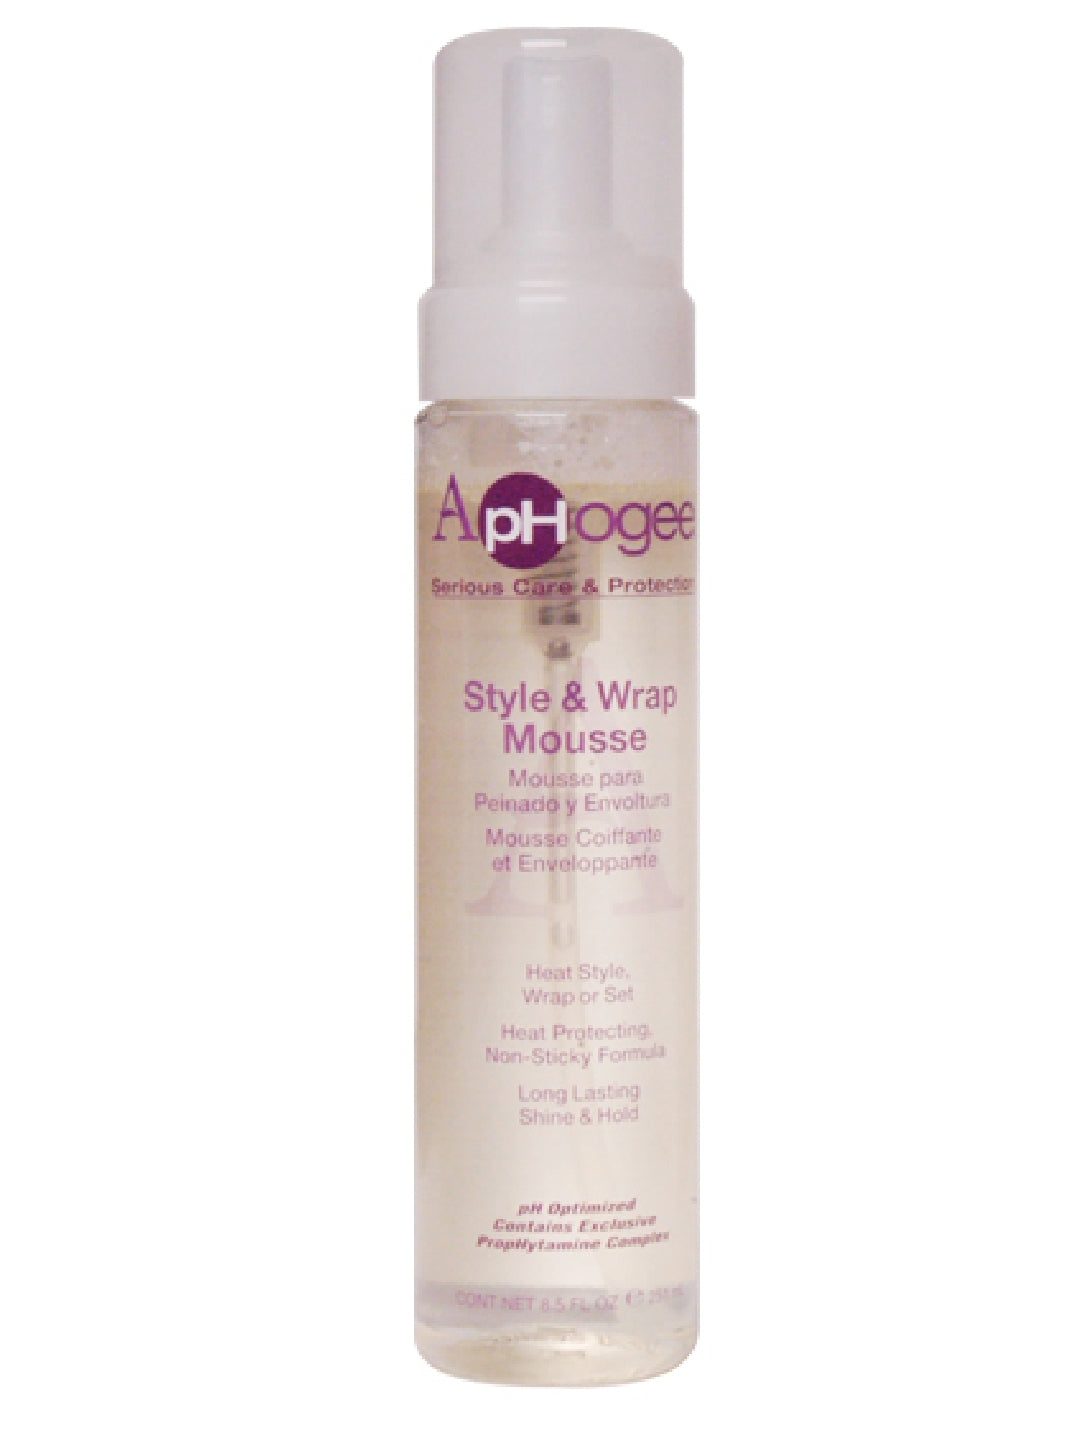 APHOGEE- STYLE & WRAP MOUSSE 8.5oz